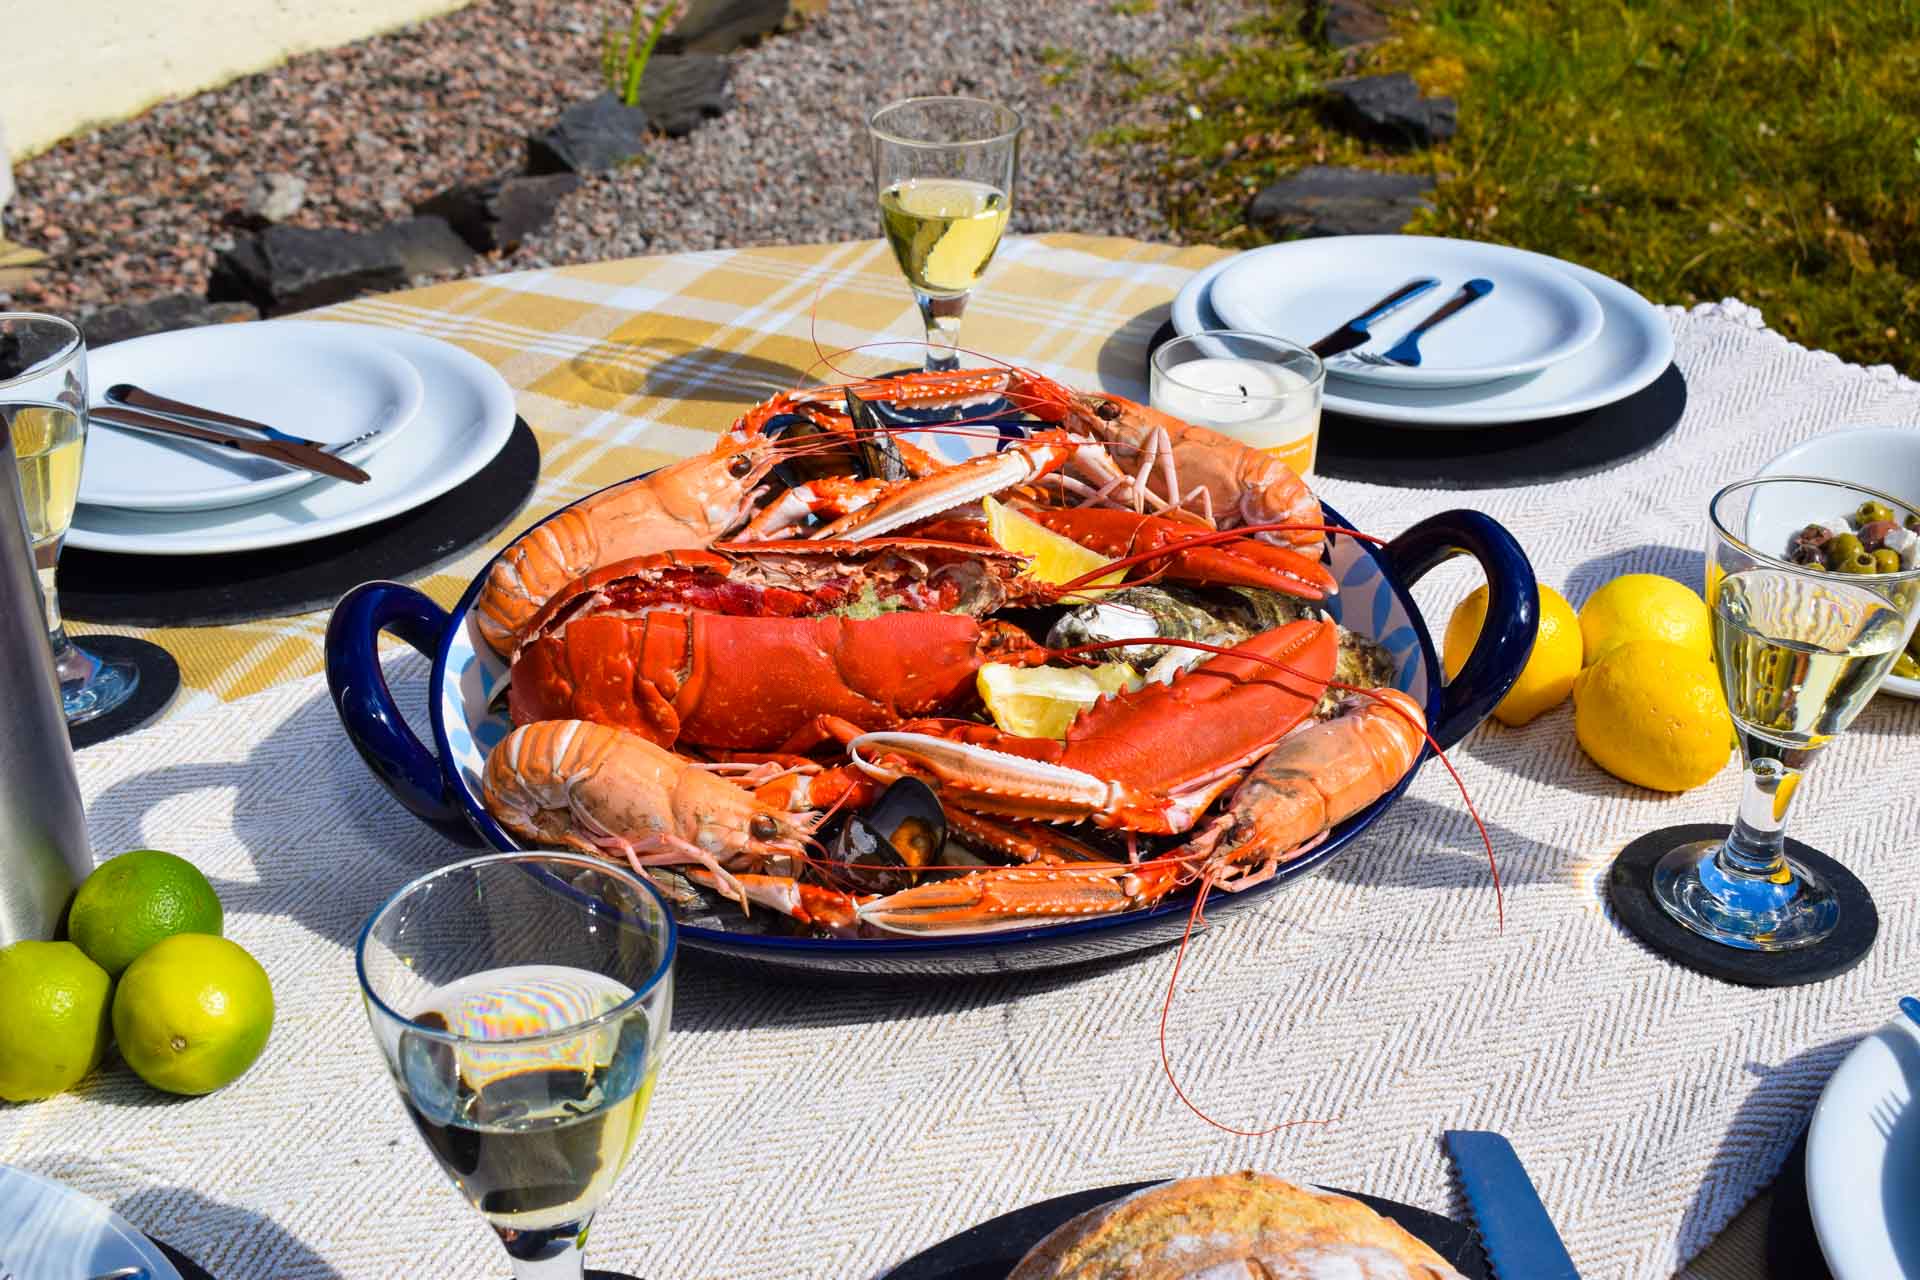 Eat locally when you stay at Birchbrae Highland Lodges and feast on the finest locally sourced Seafood